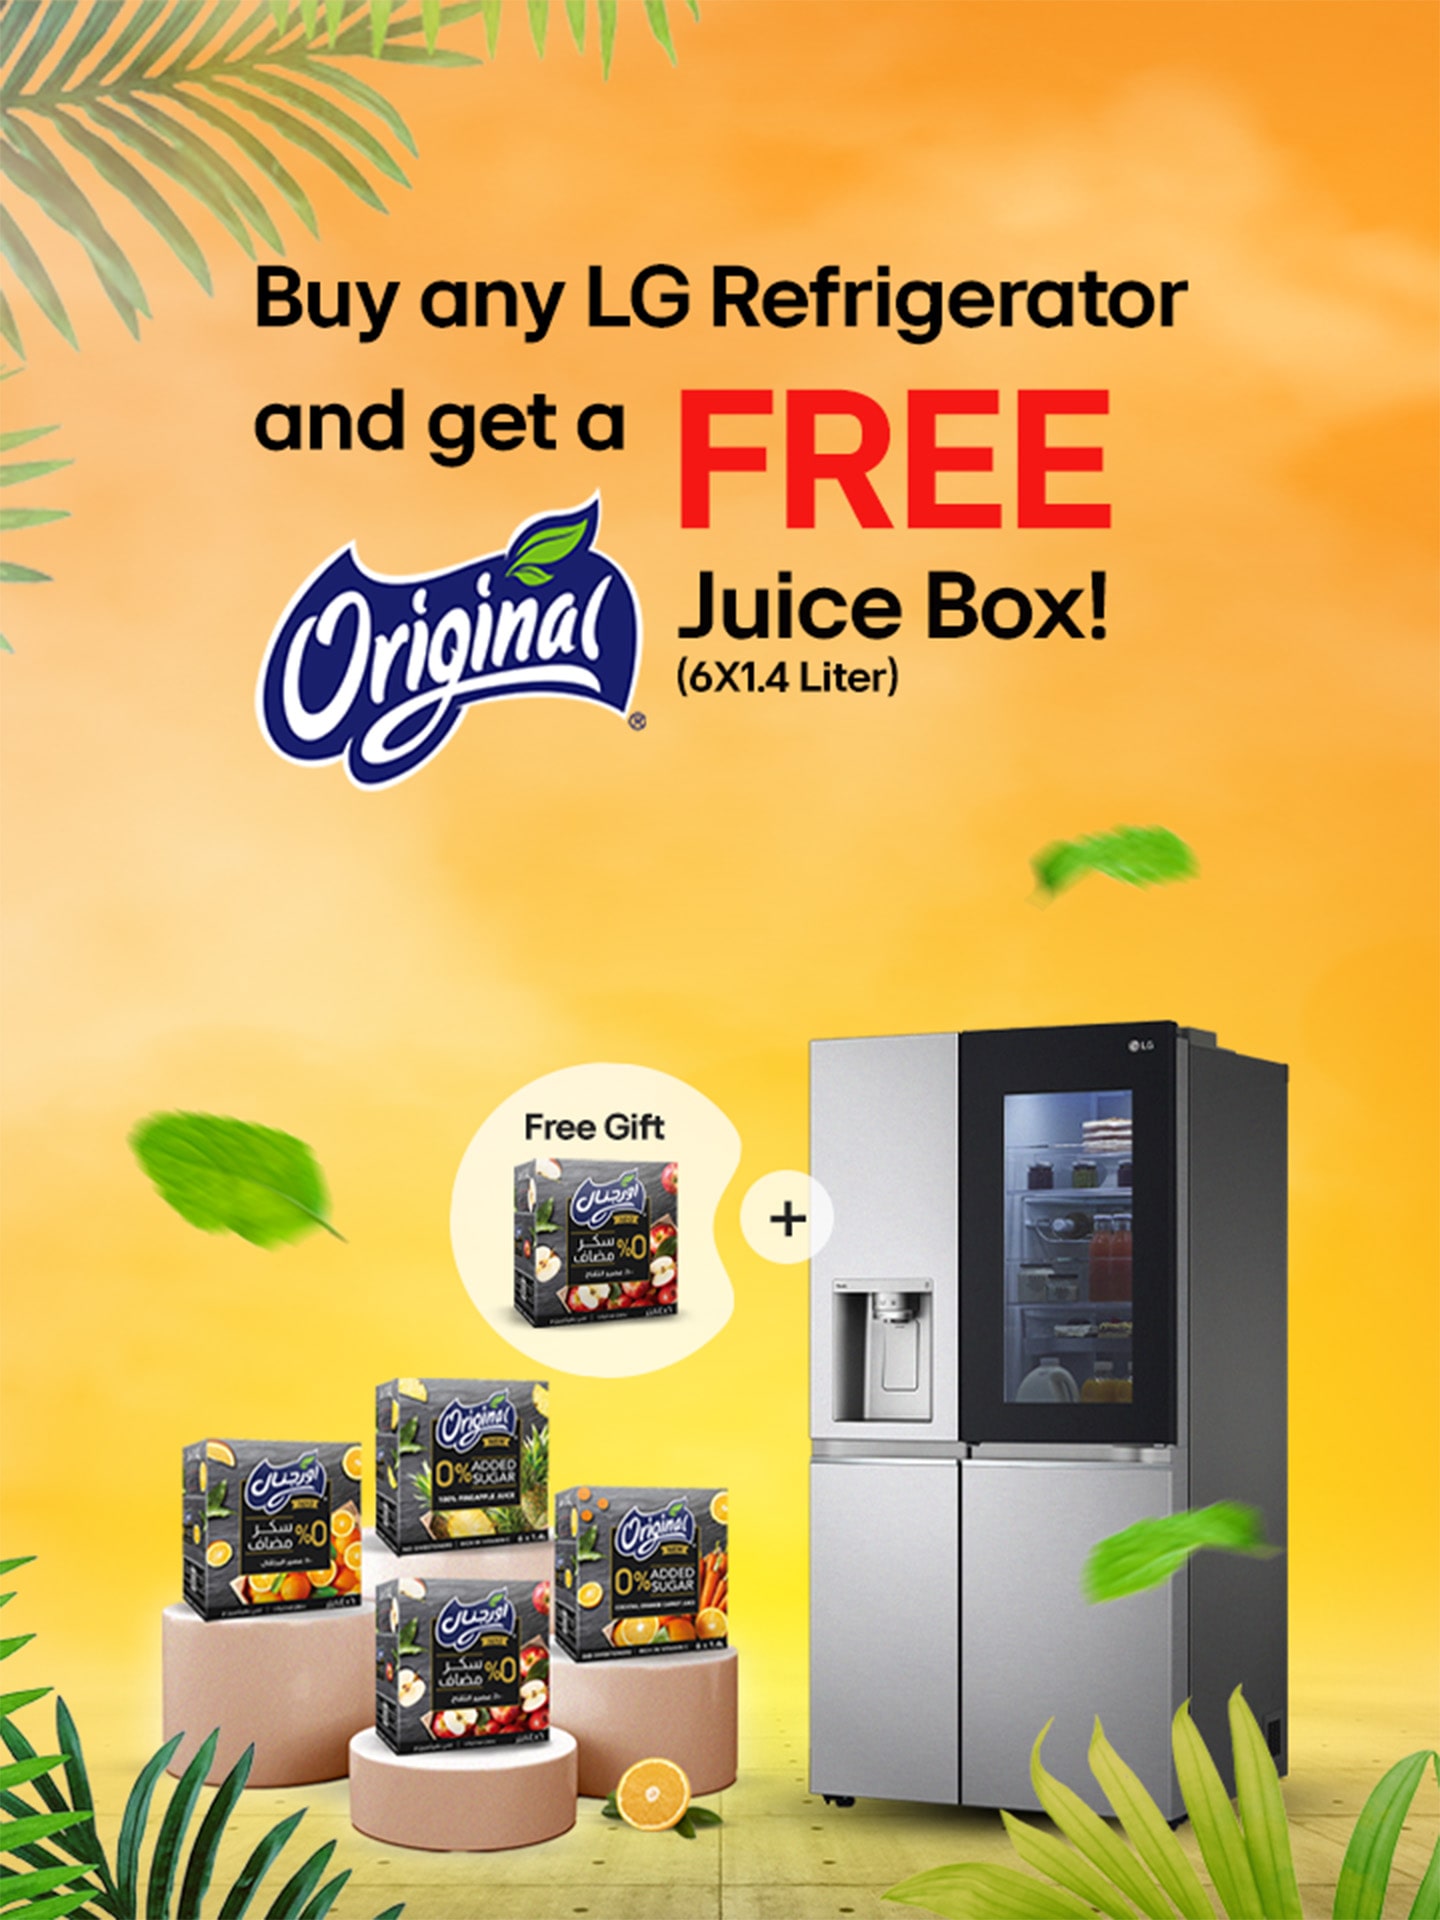 Get Juice Box with any of LG Refrigerator